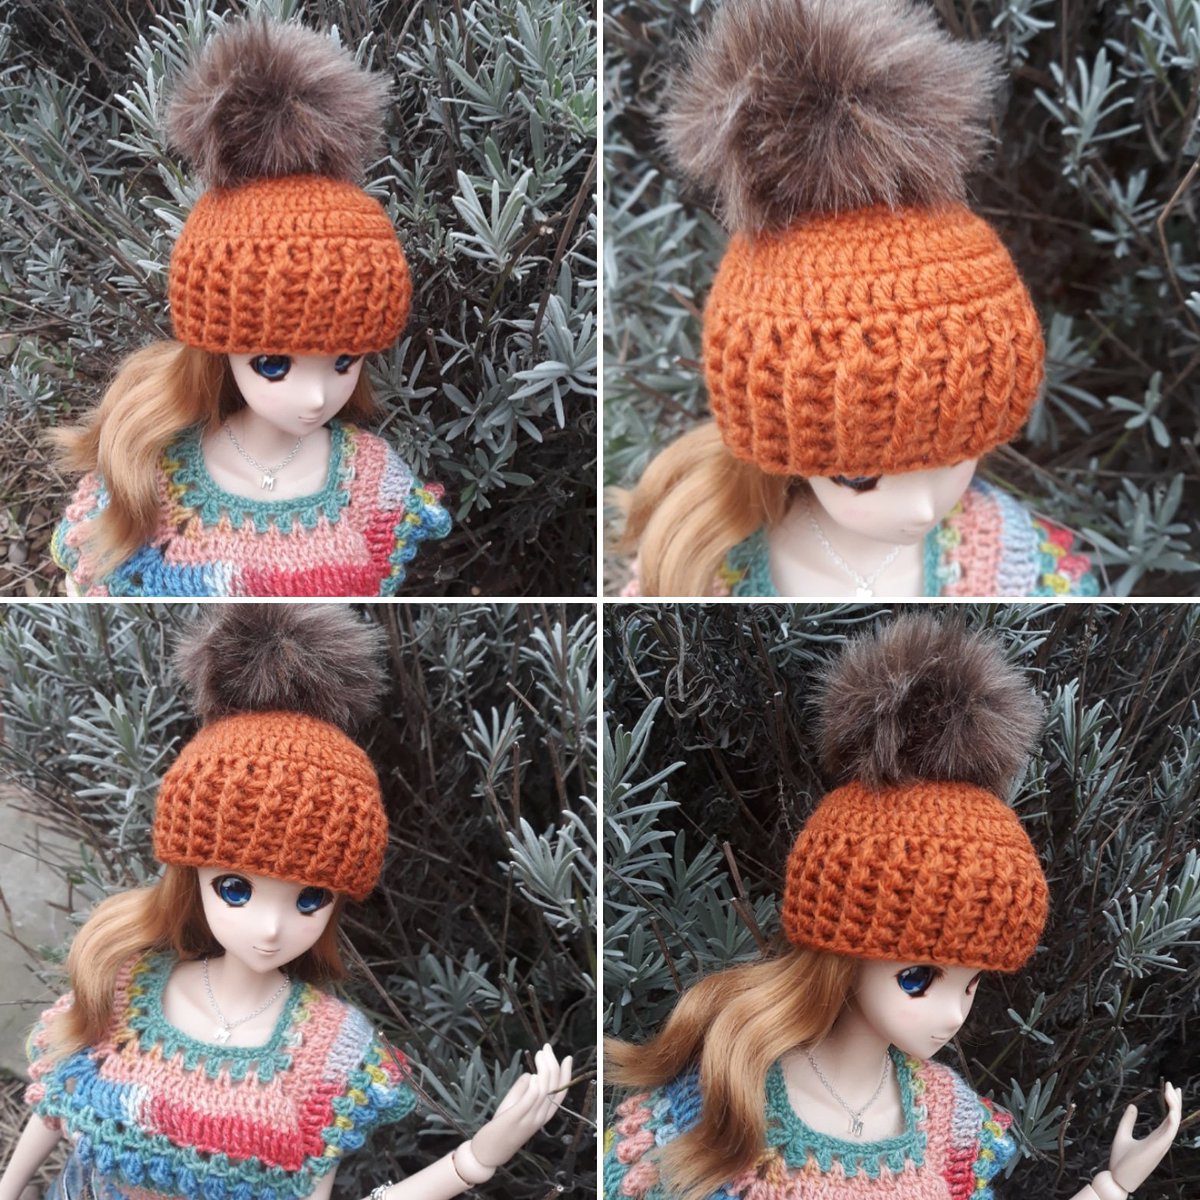 New hat design will be ready for etsy at the end of the week 😊 #Mirai #Smartdoll #Dannychoo #crochet #dollhats #bysara #dolls #etsy #etsyoctopudding #pompomhat @dannychoo @mirairobotics